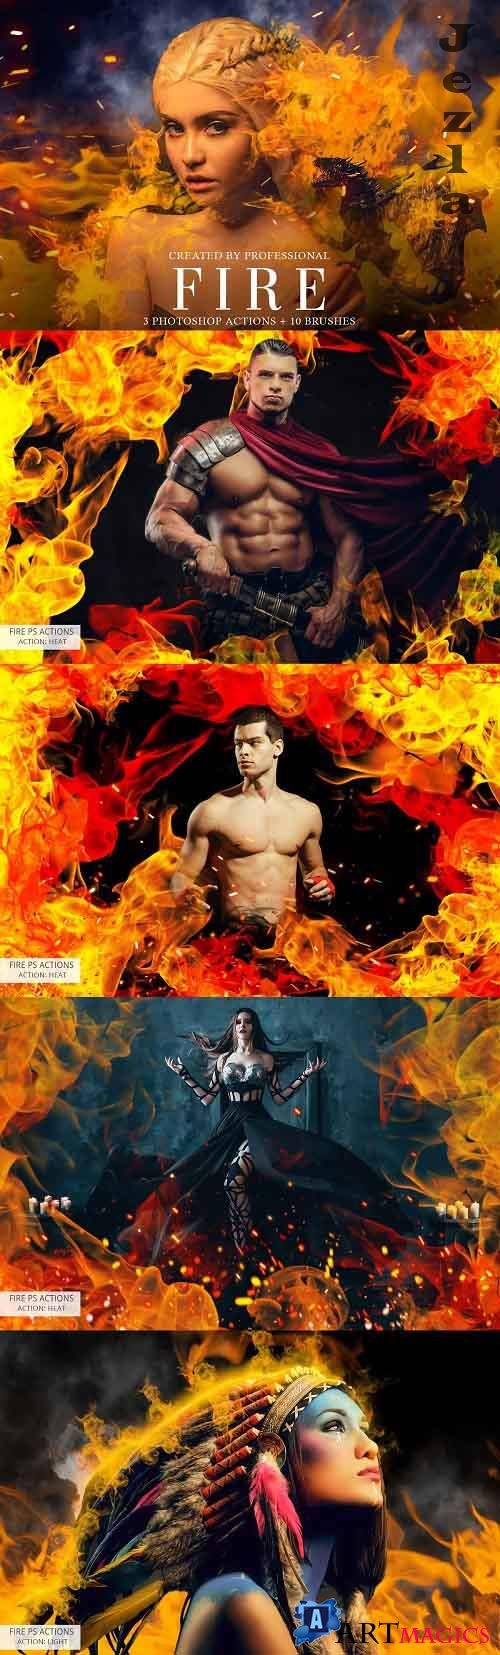 CreativeMarket - Fire Actions Photoshop 5328474